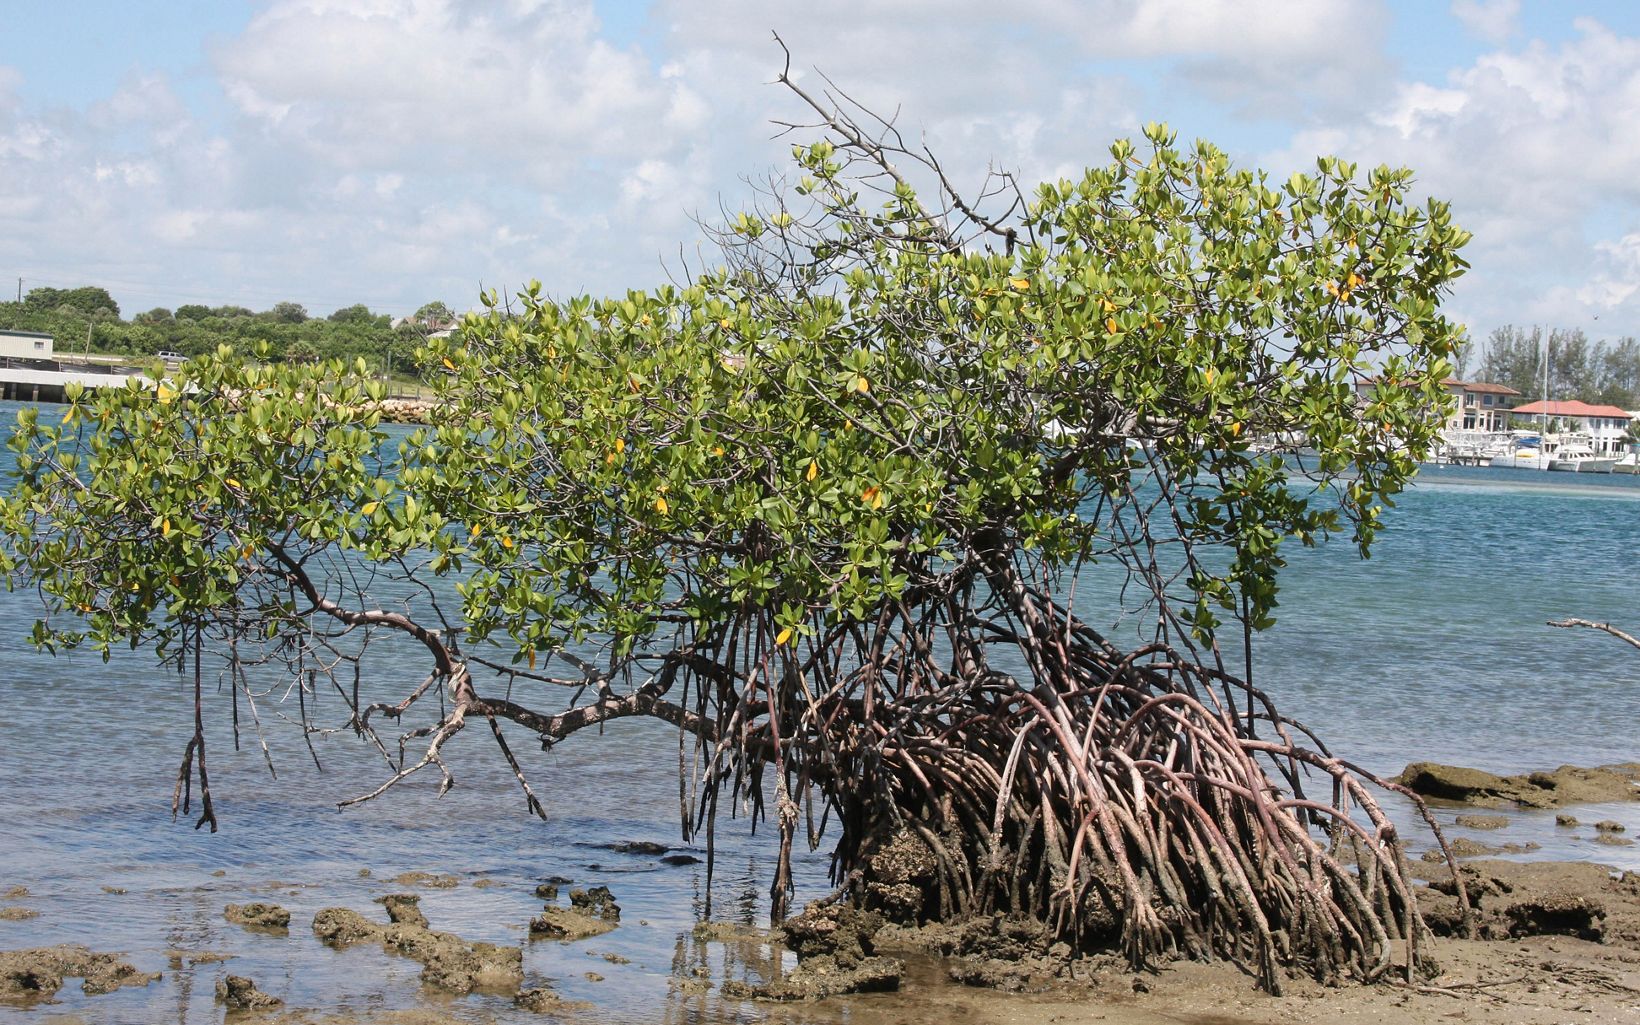 Red Mangroves A red mangrove (Rhizophora mangle) grows at Blowing Rocks Preserve in Florida. © JMC Photography